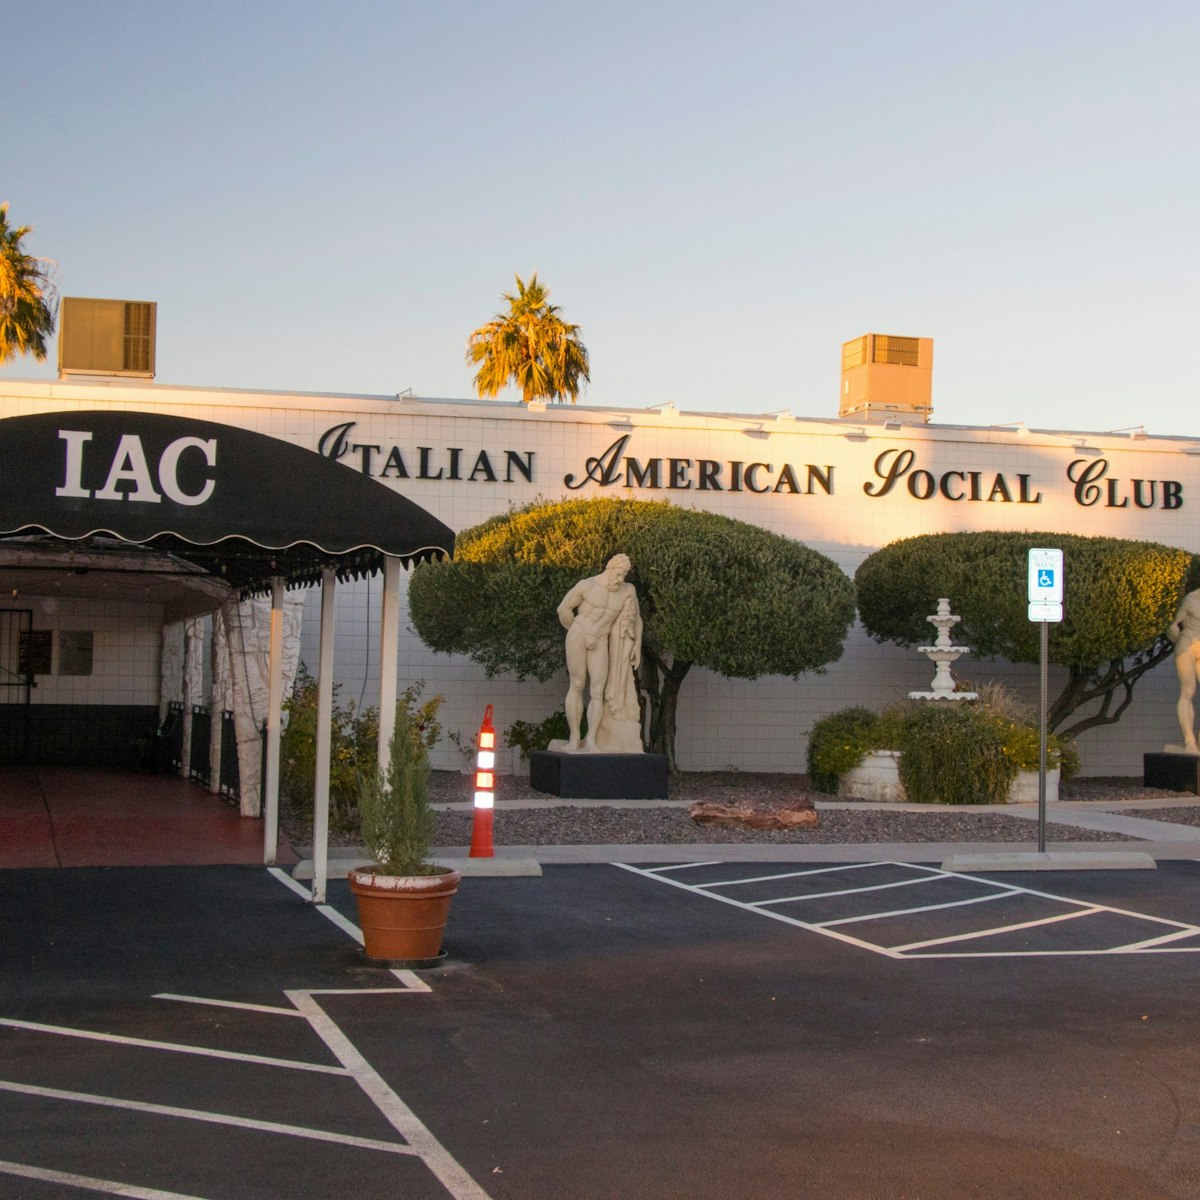 The Italian American Club features a lounge, restaurant and live music from the Rat Pack era.